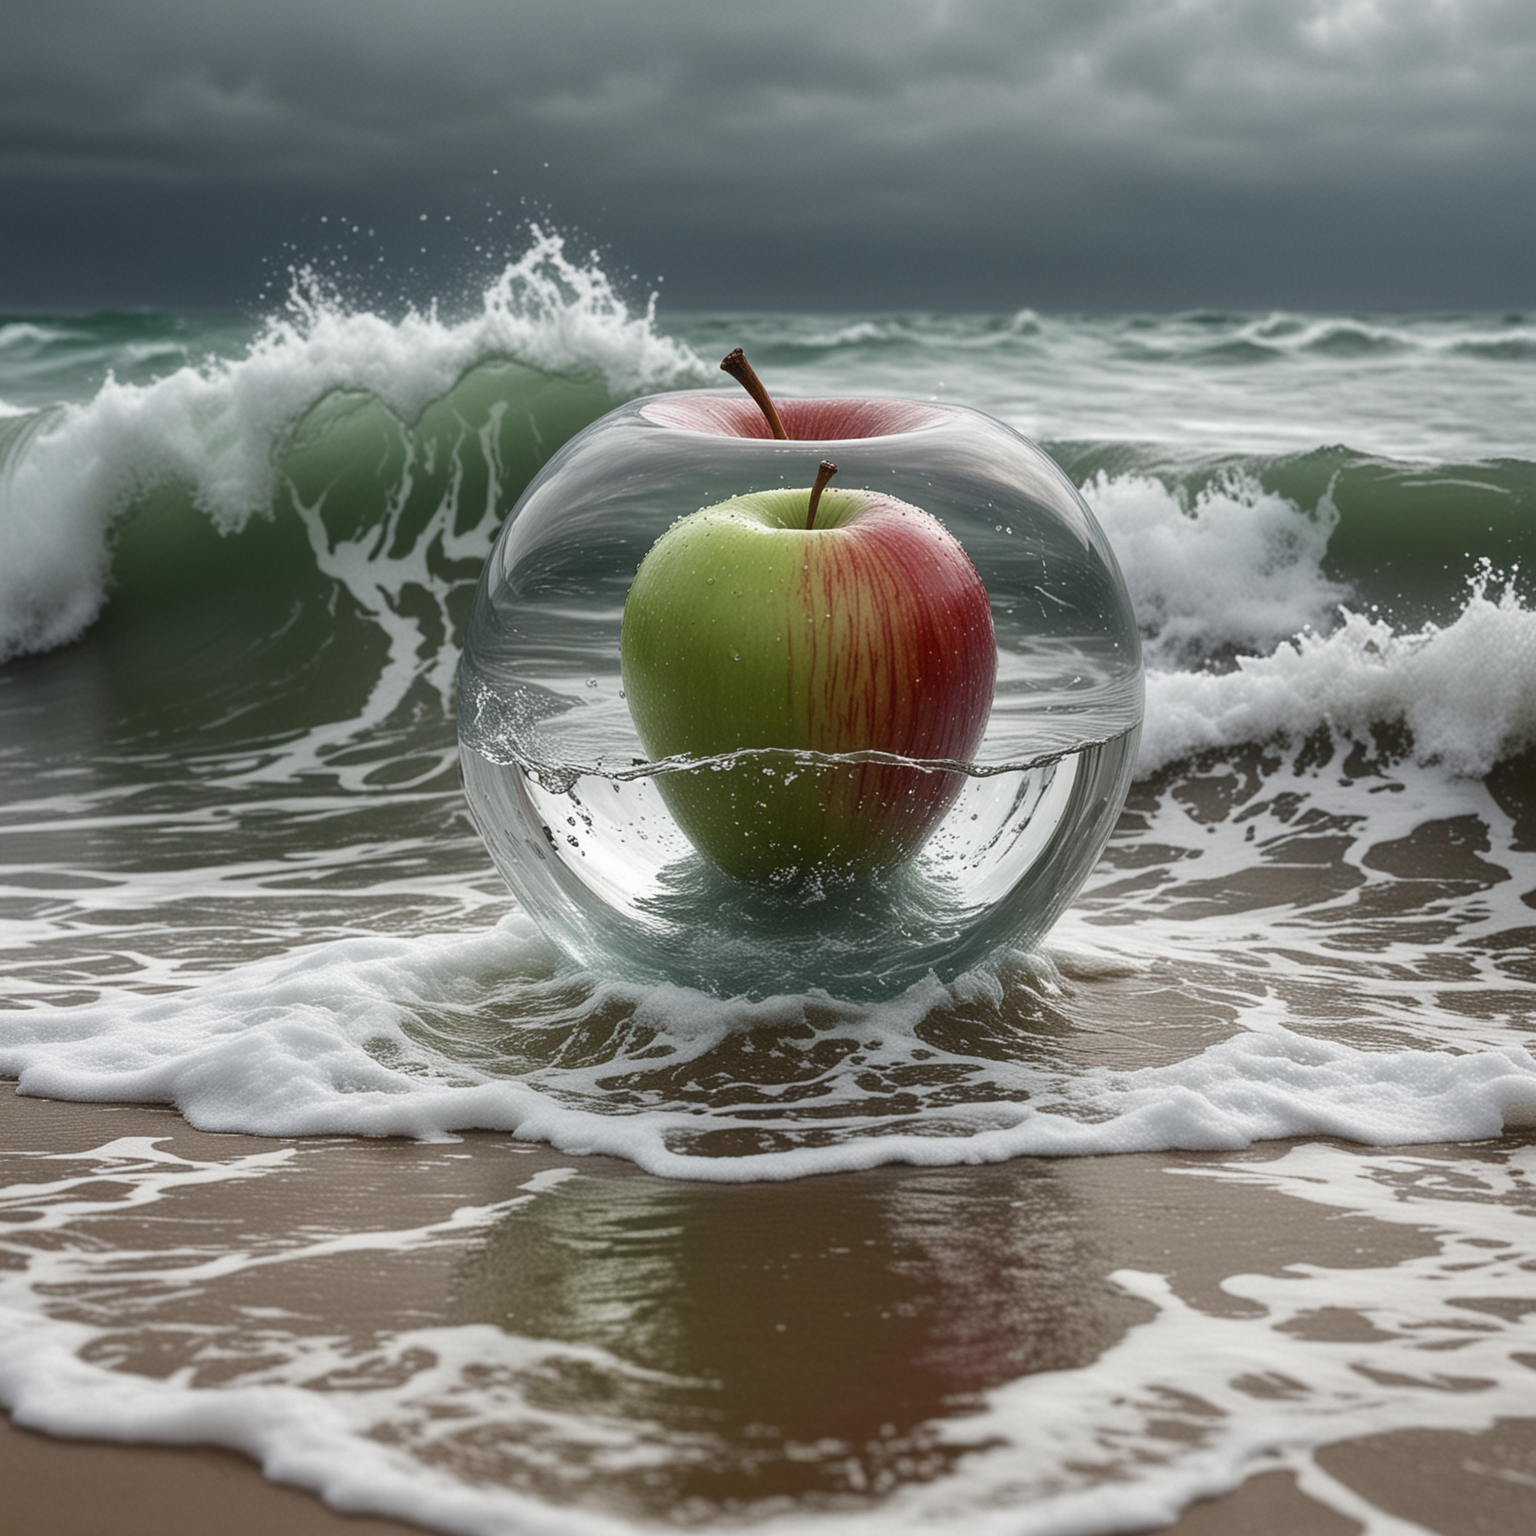 Surreal Transparent Apple with Miniature Storm Inside